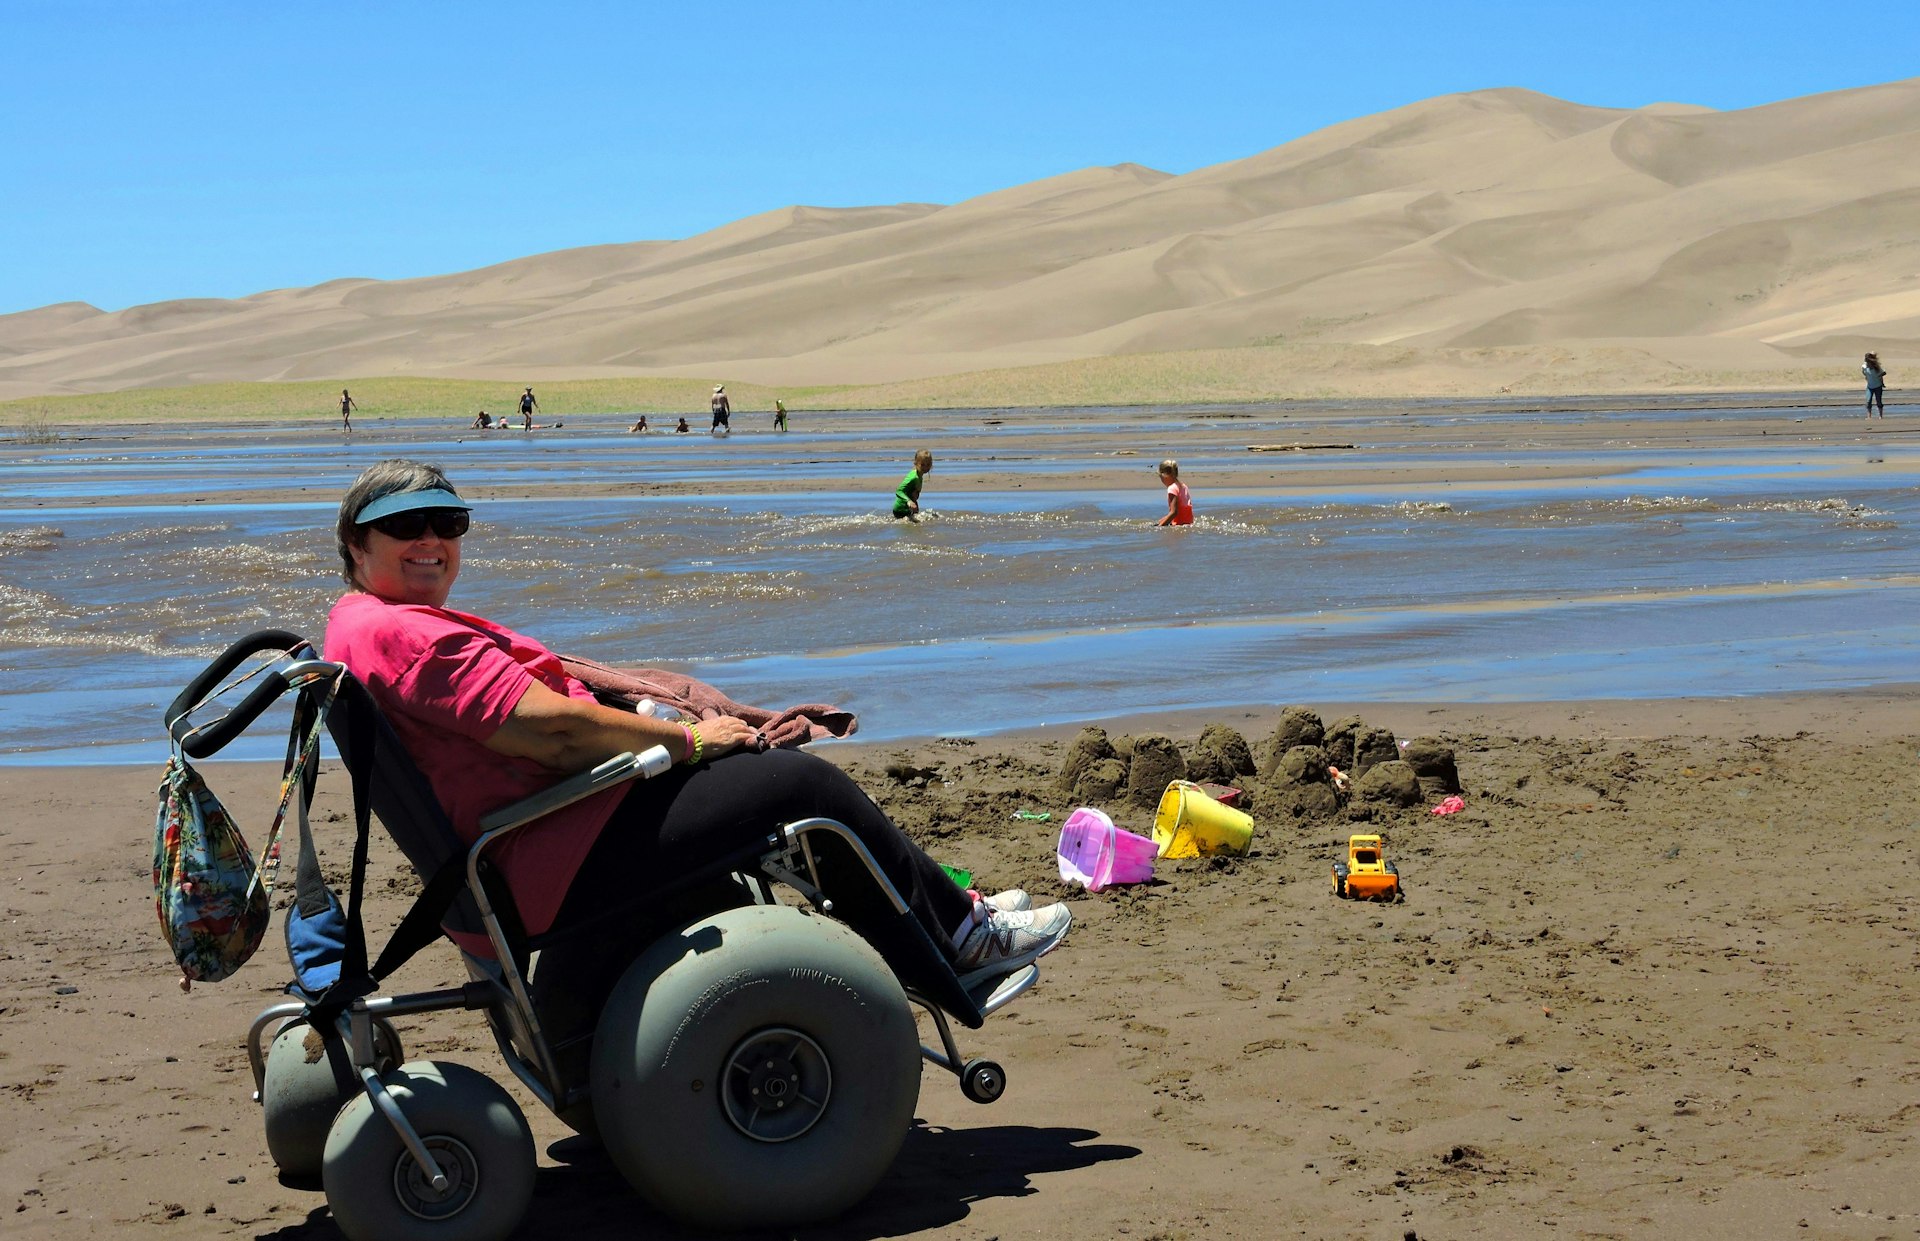 The special sand-roving wheelchairs available for rent at Sand Dunes National Park